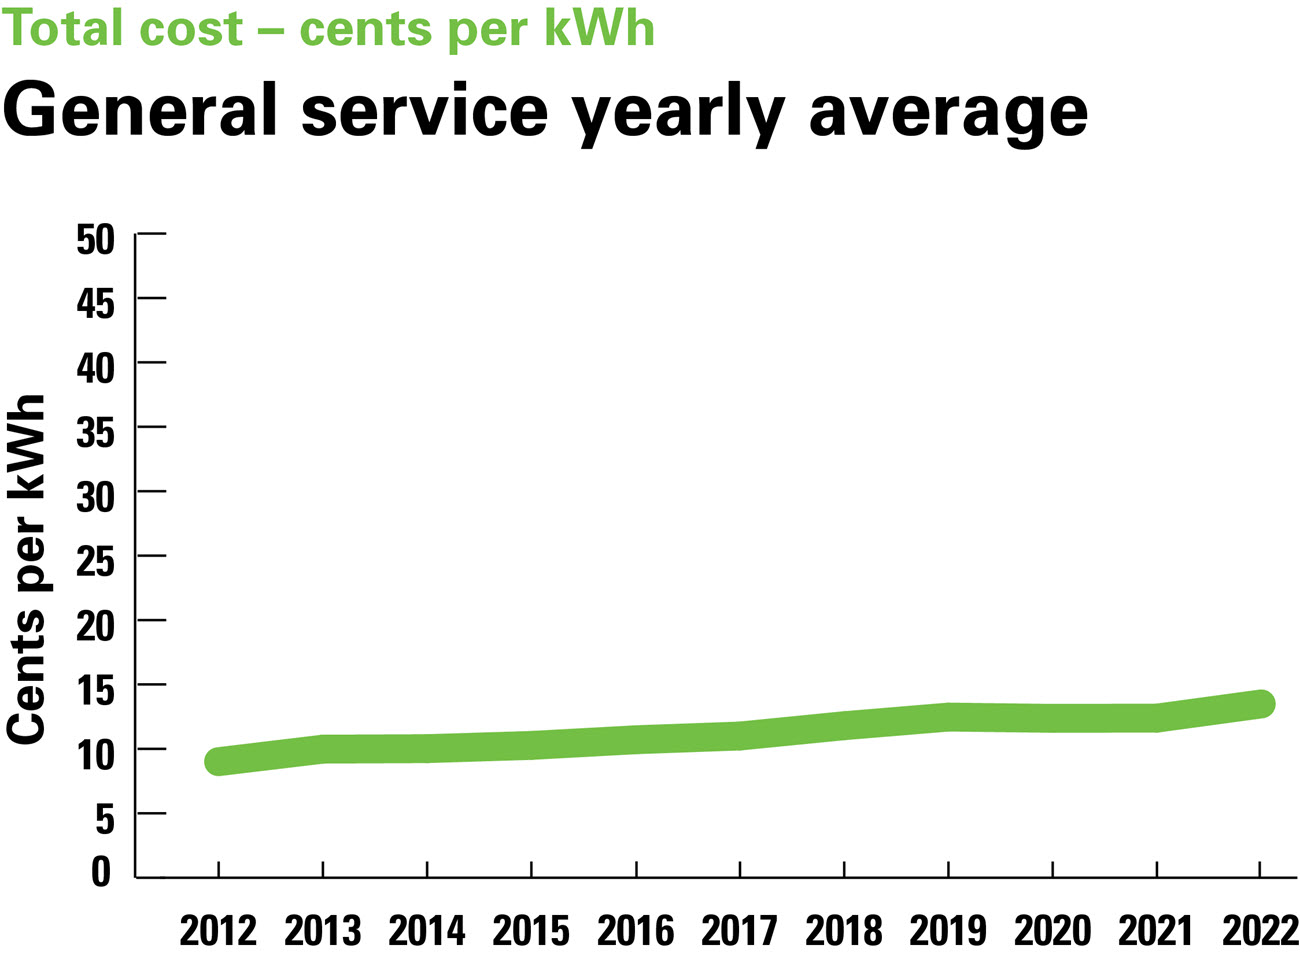 Line graph showing general service yearly average total cost in cents per Kwh 